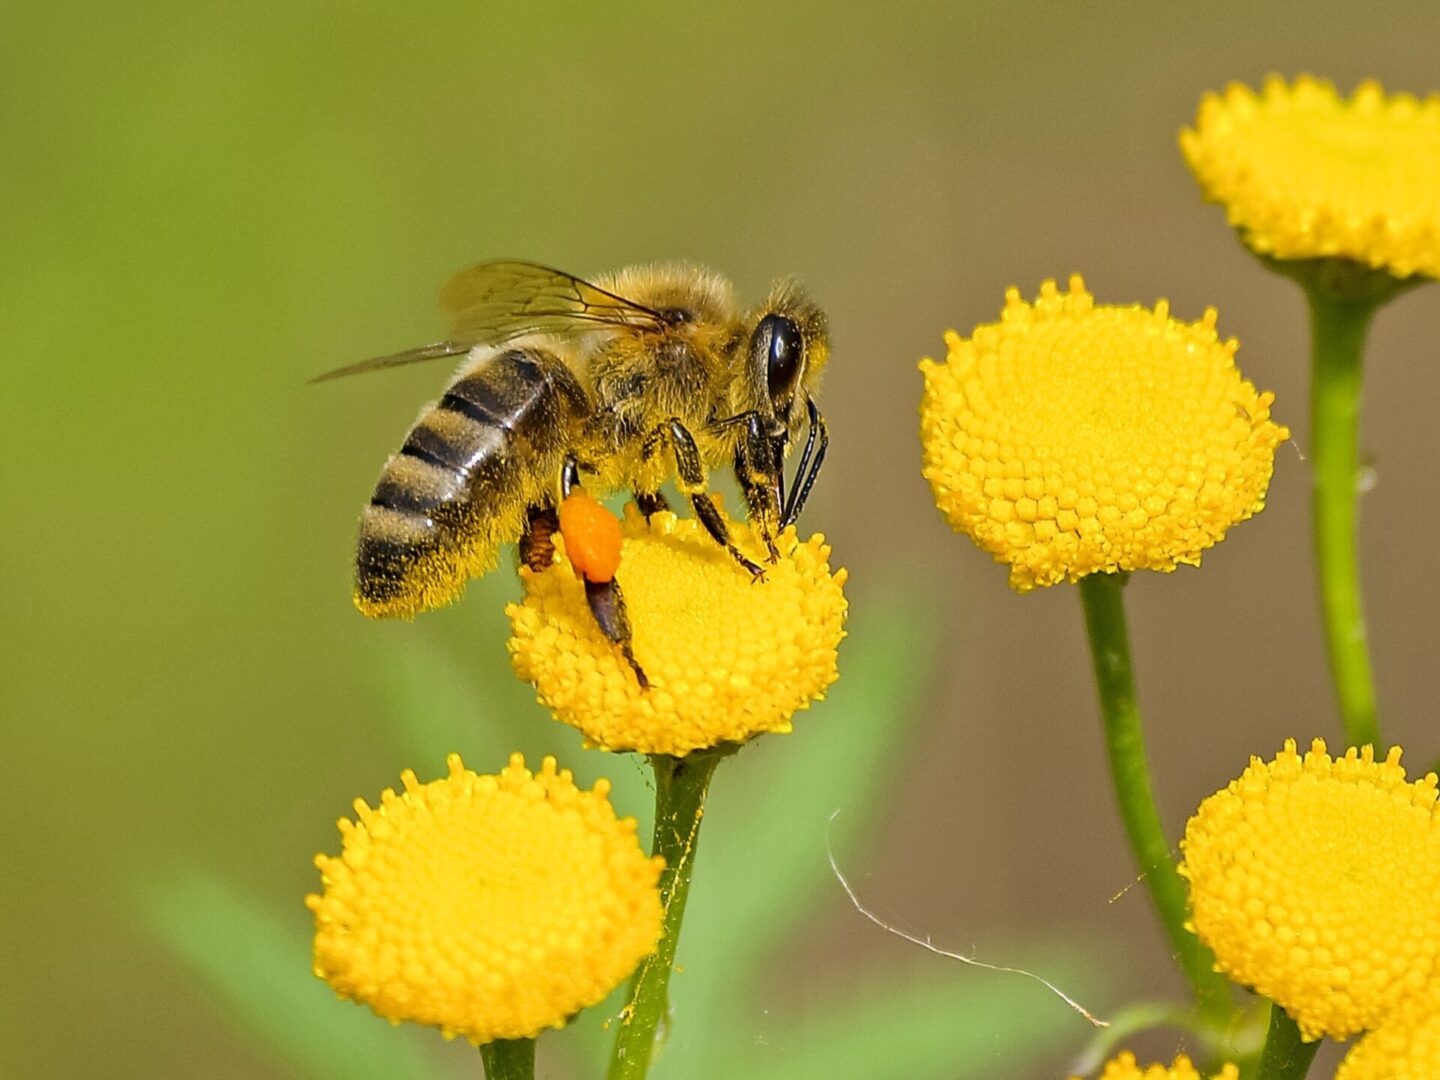 A bee is flying around yellow flowers.